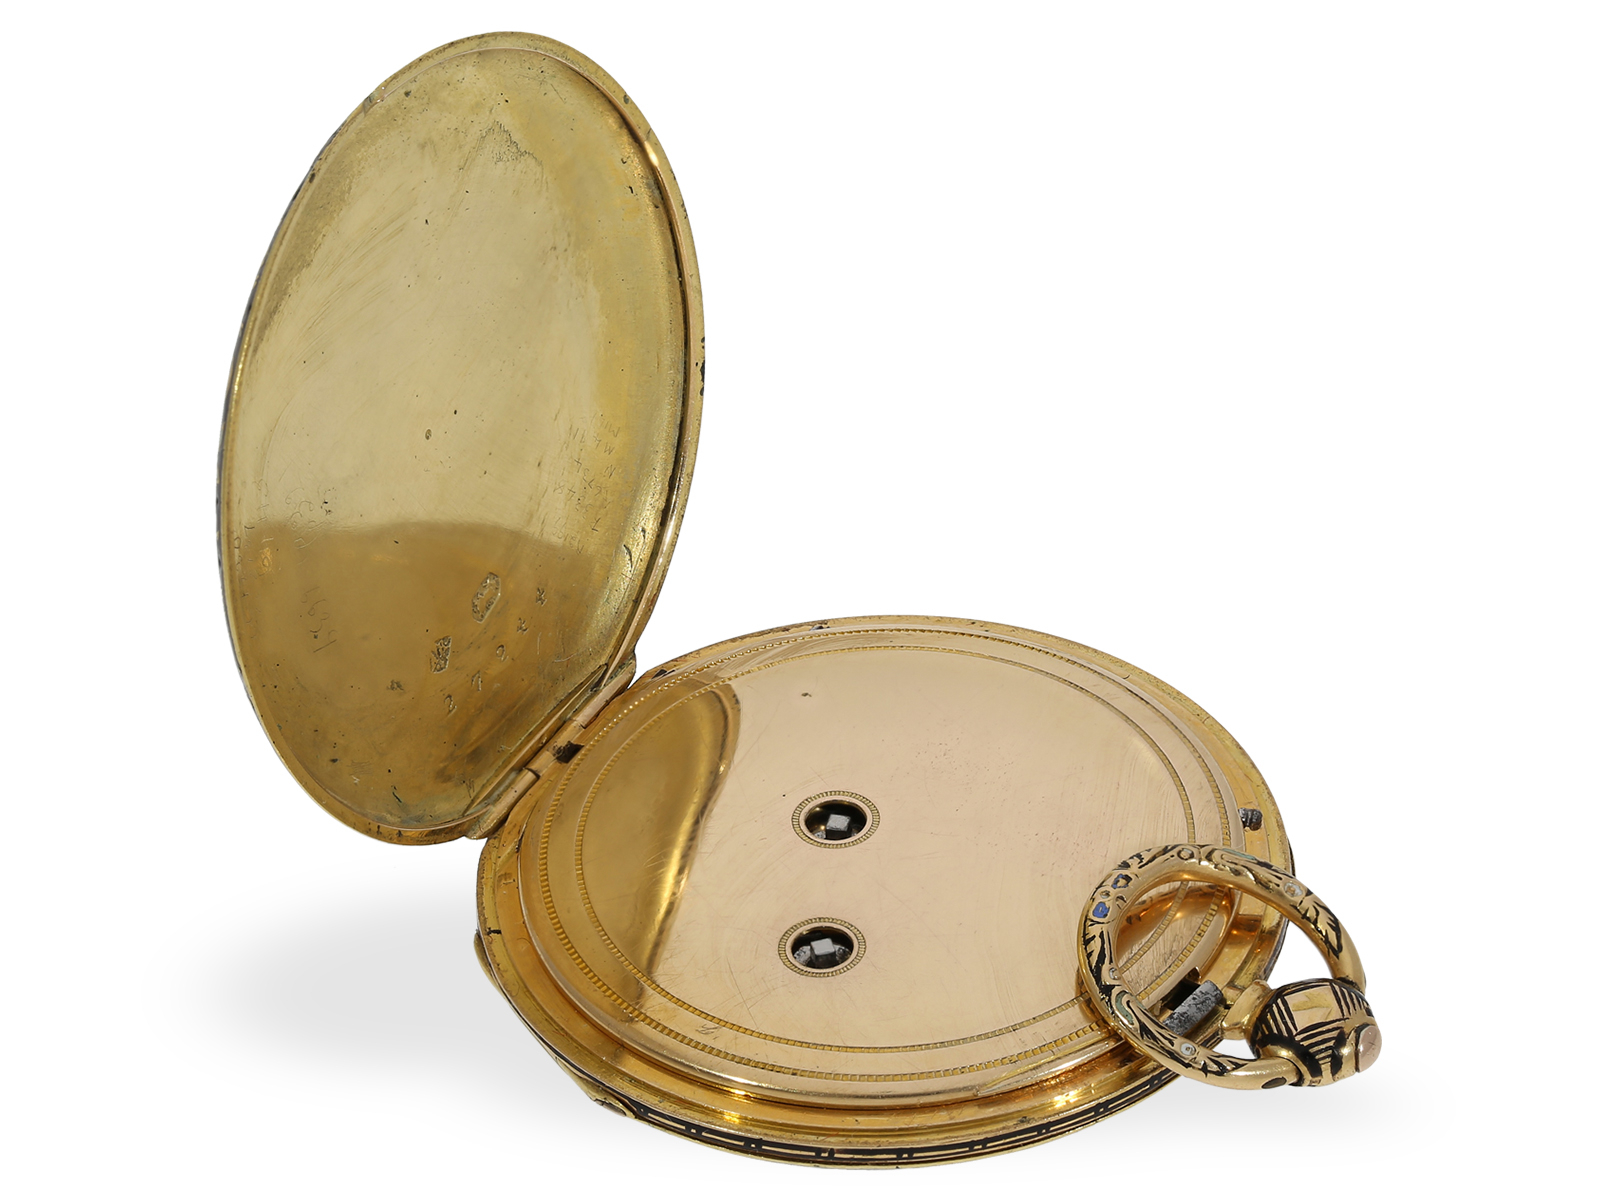 Pocket watch: excellently preserved gold/enamel lepine with decentral dial, ca. 1820 - Image 3 of 4